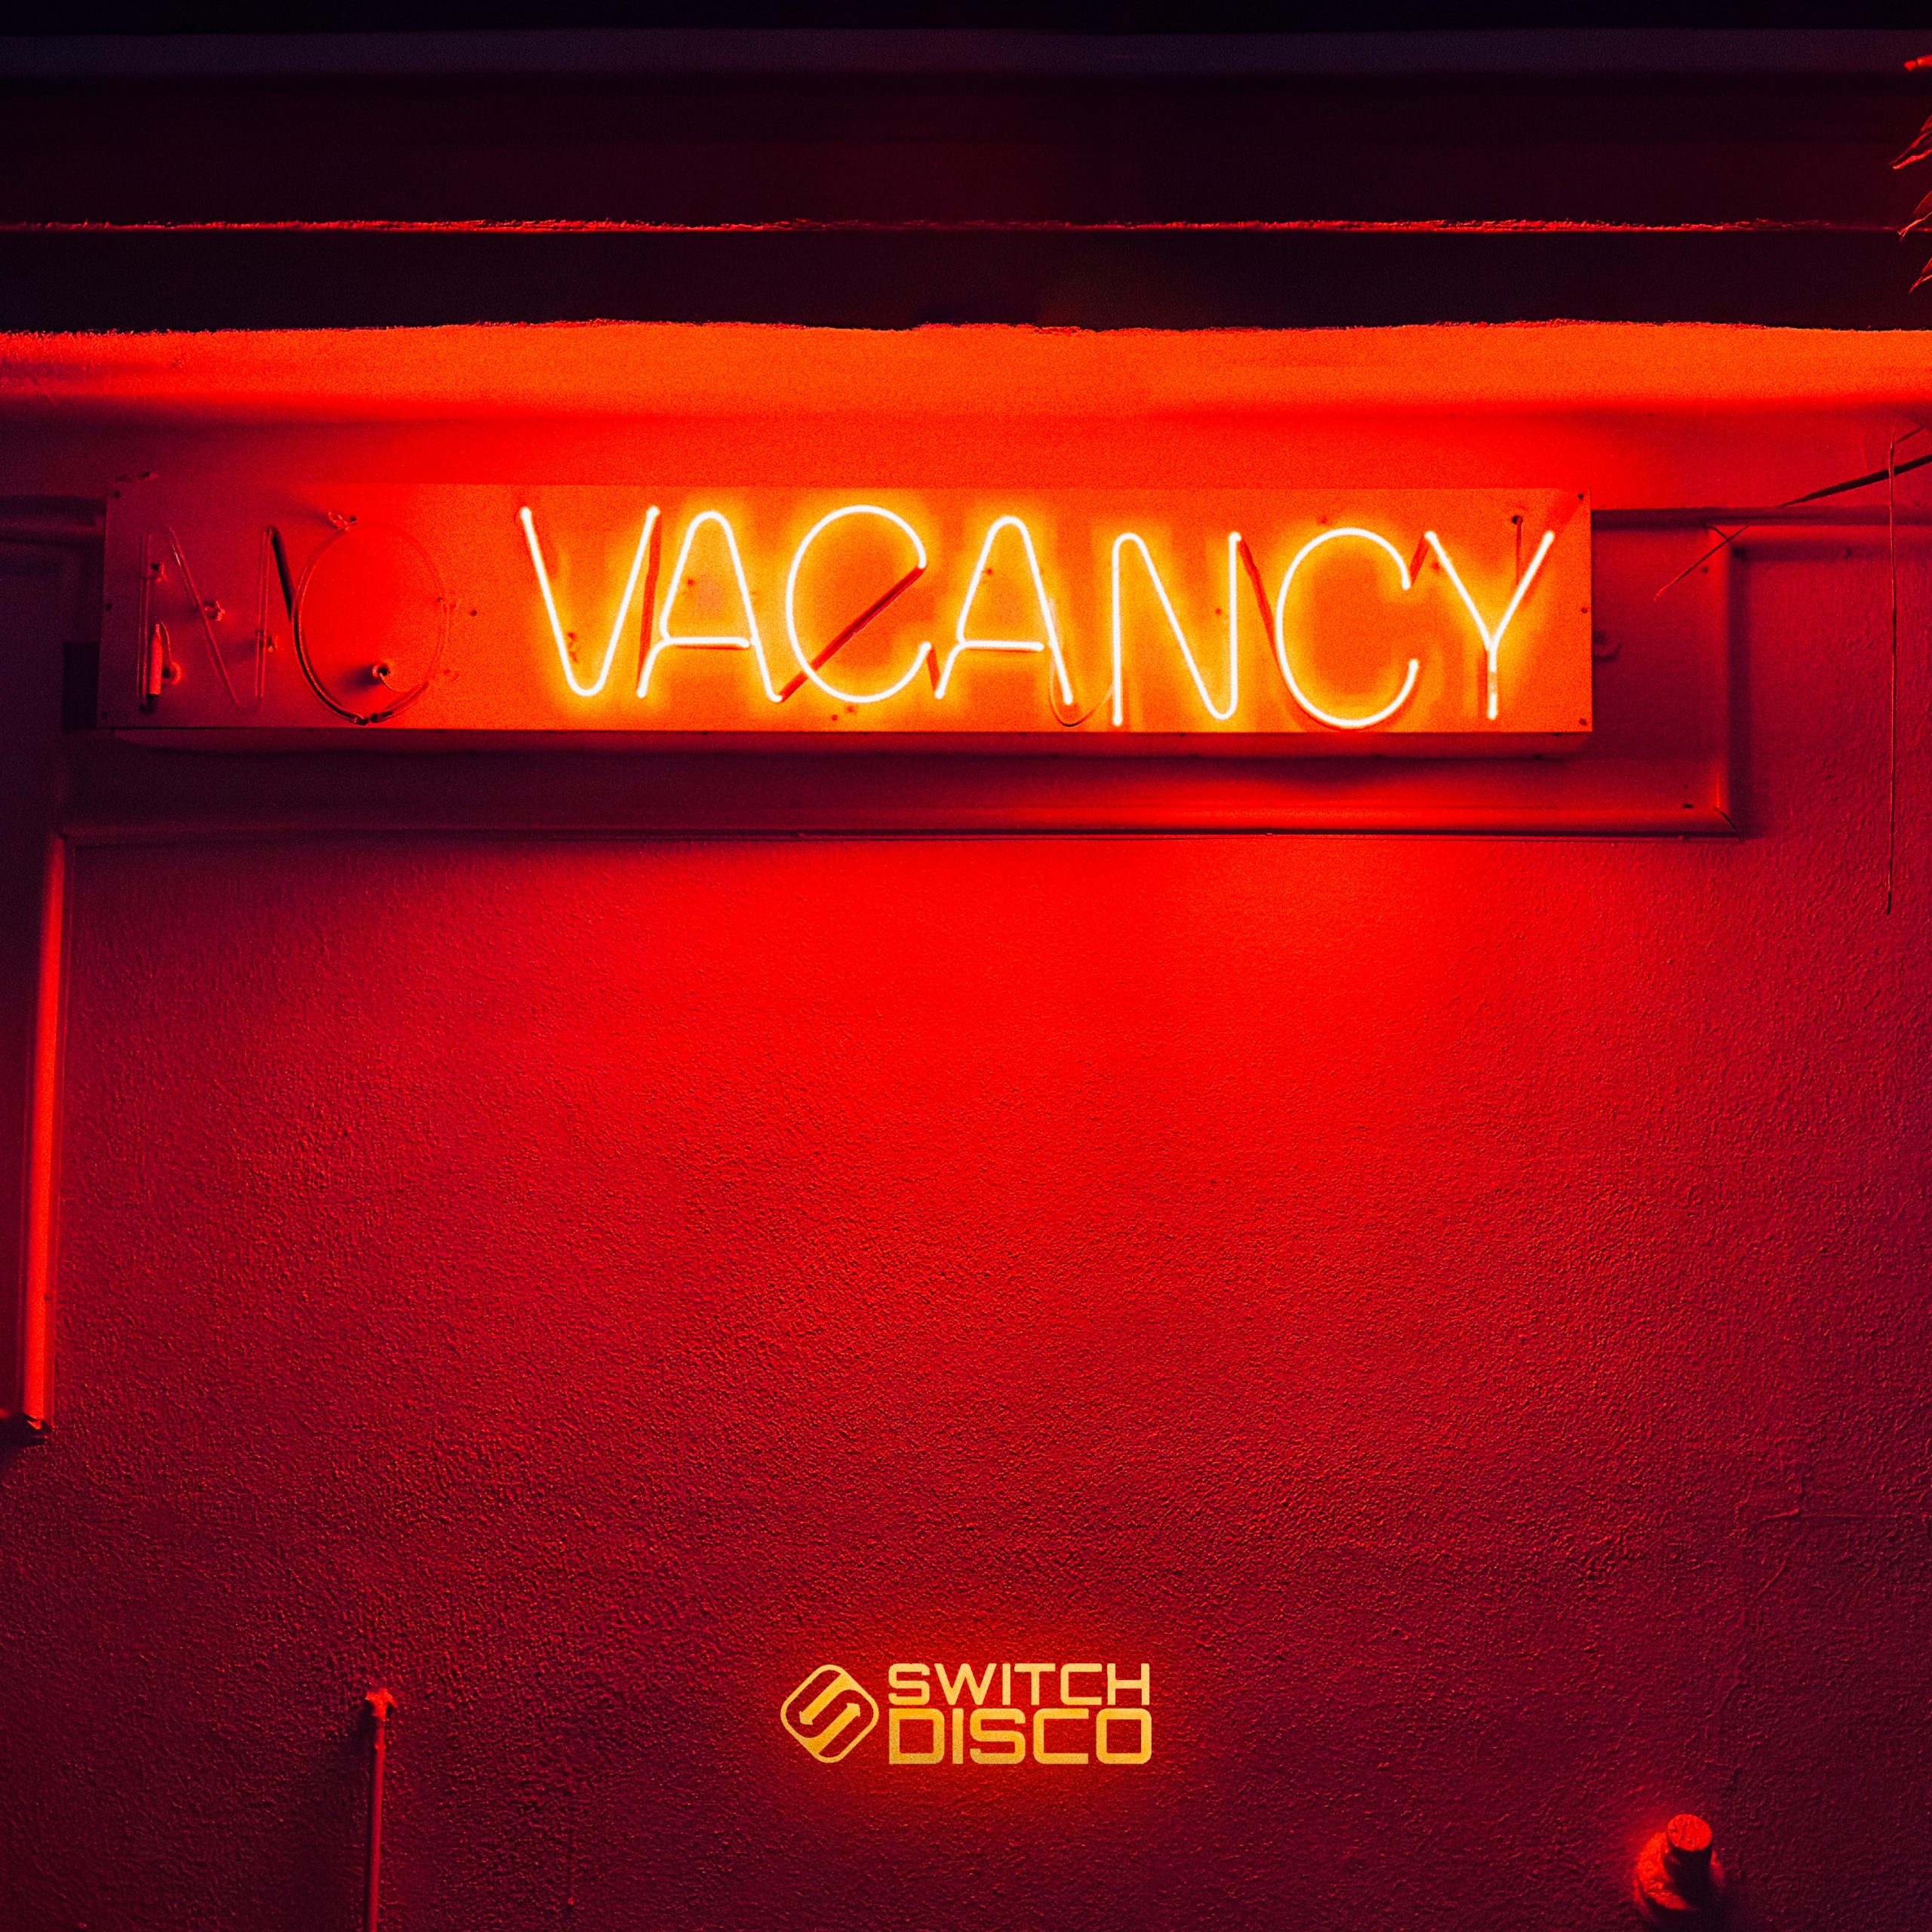 You are currently viewing SuperNova: Switch Disco – Vacancy (08.12)